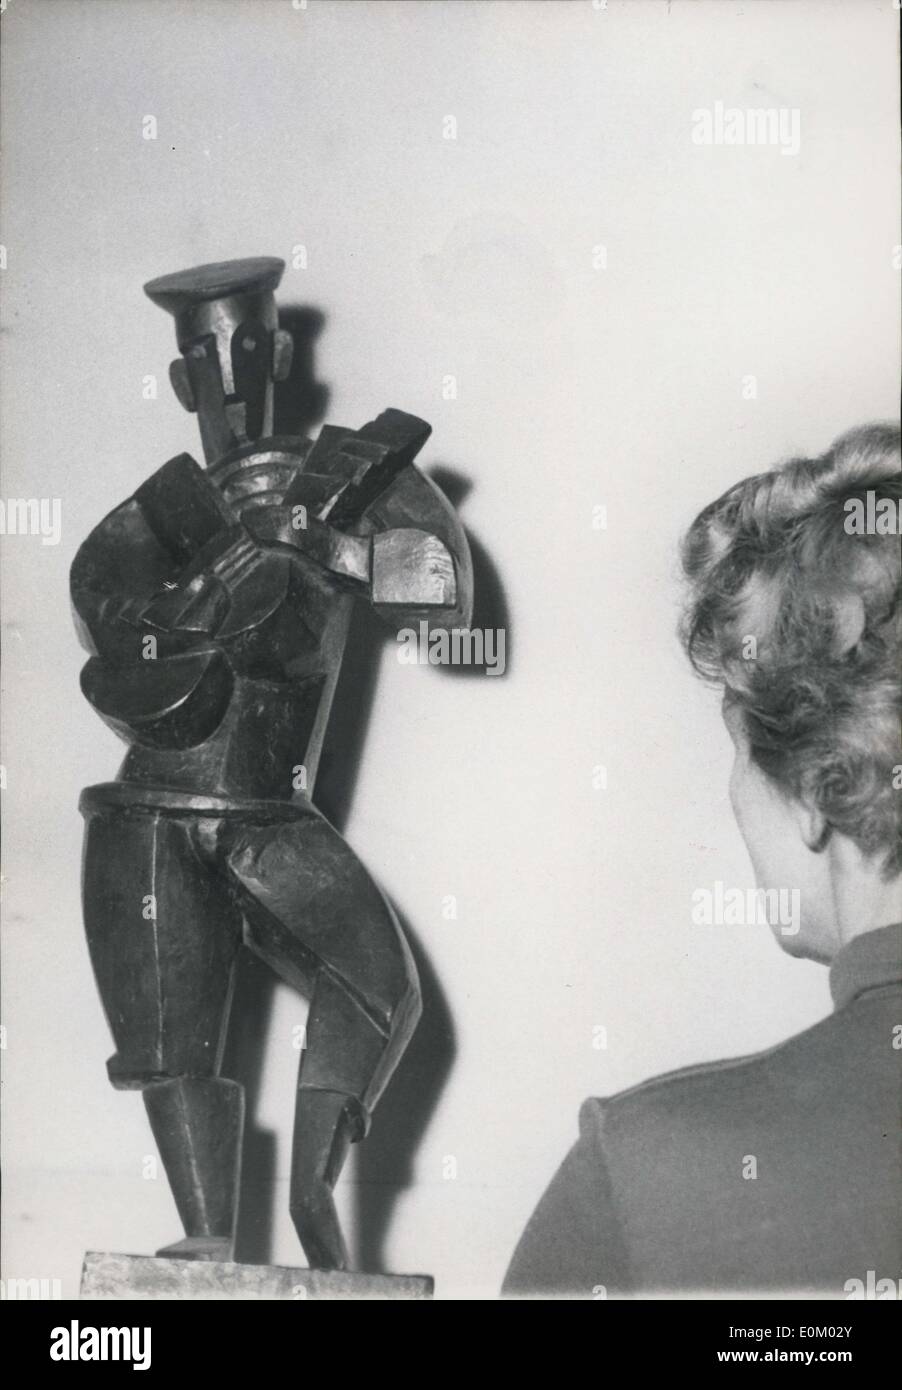 Feb. 02, 1953 - Cubism Revived at a Paris Art Exhibition one of the Strange looking figures that can be seen at the retrospective Cubist Exhibition now being held at the Museum of Modern arts, Paris. Stock Photo